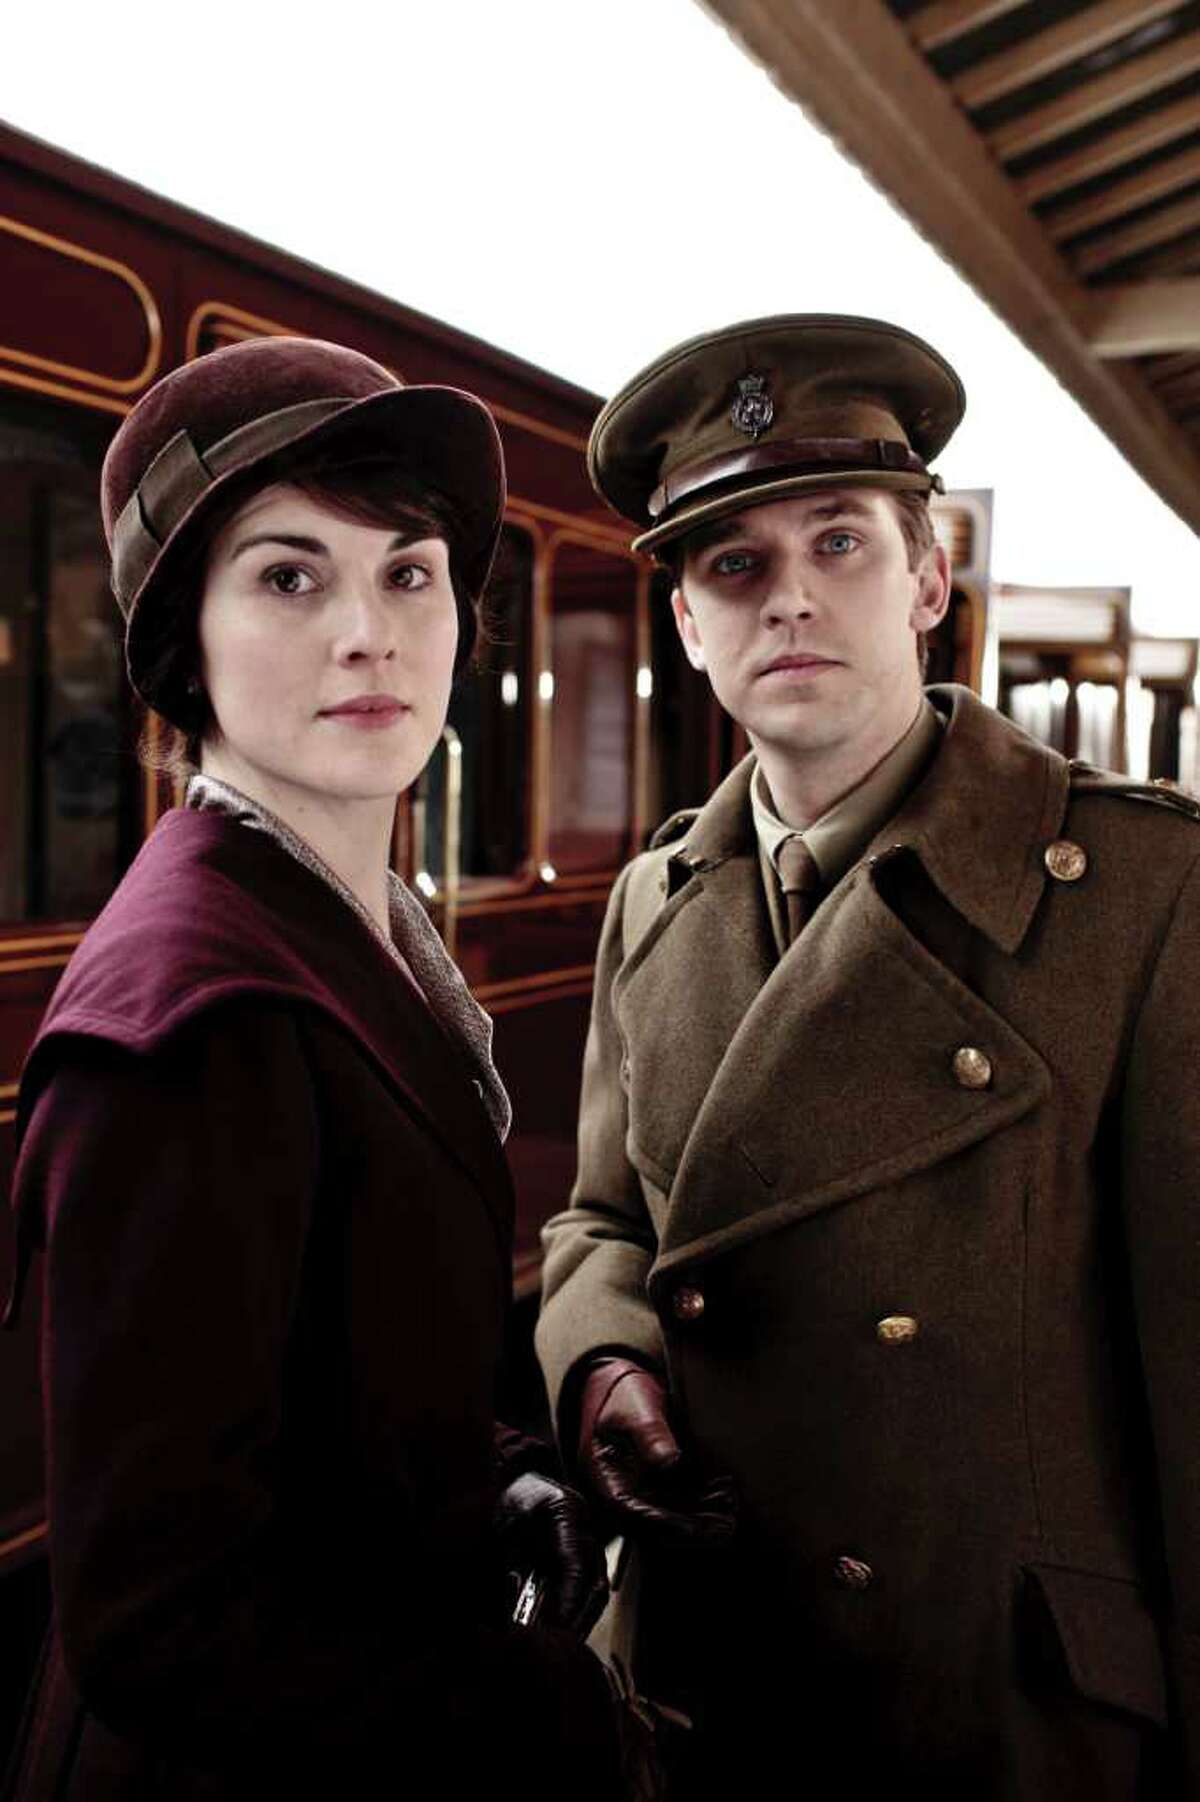 Michelle Dockery as Lady Mary and Dan Stevens as Matthew Crawley star in the PBC miniseries "Downton Abbey."